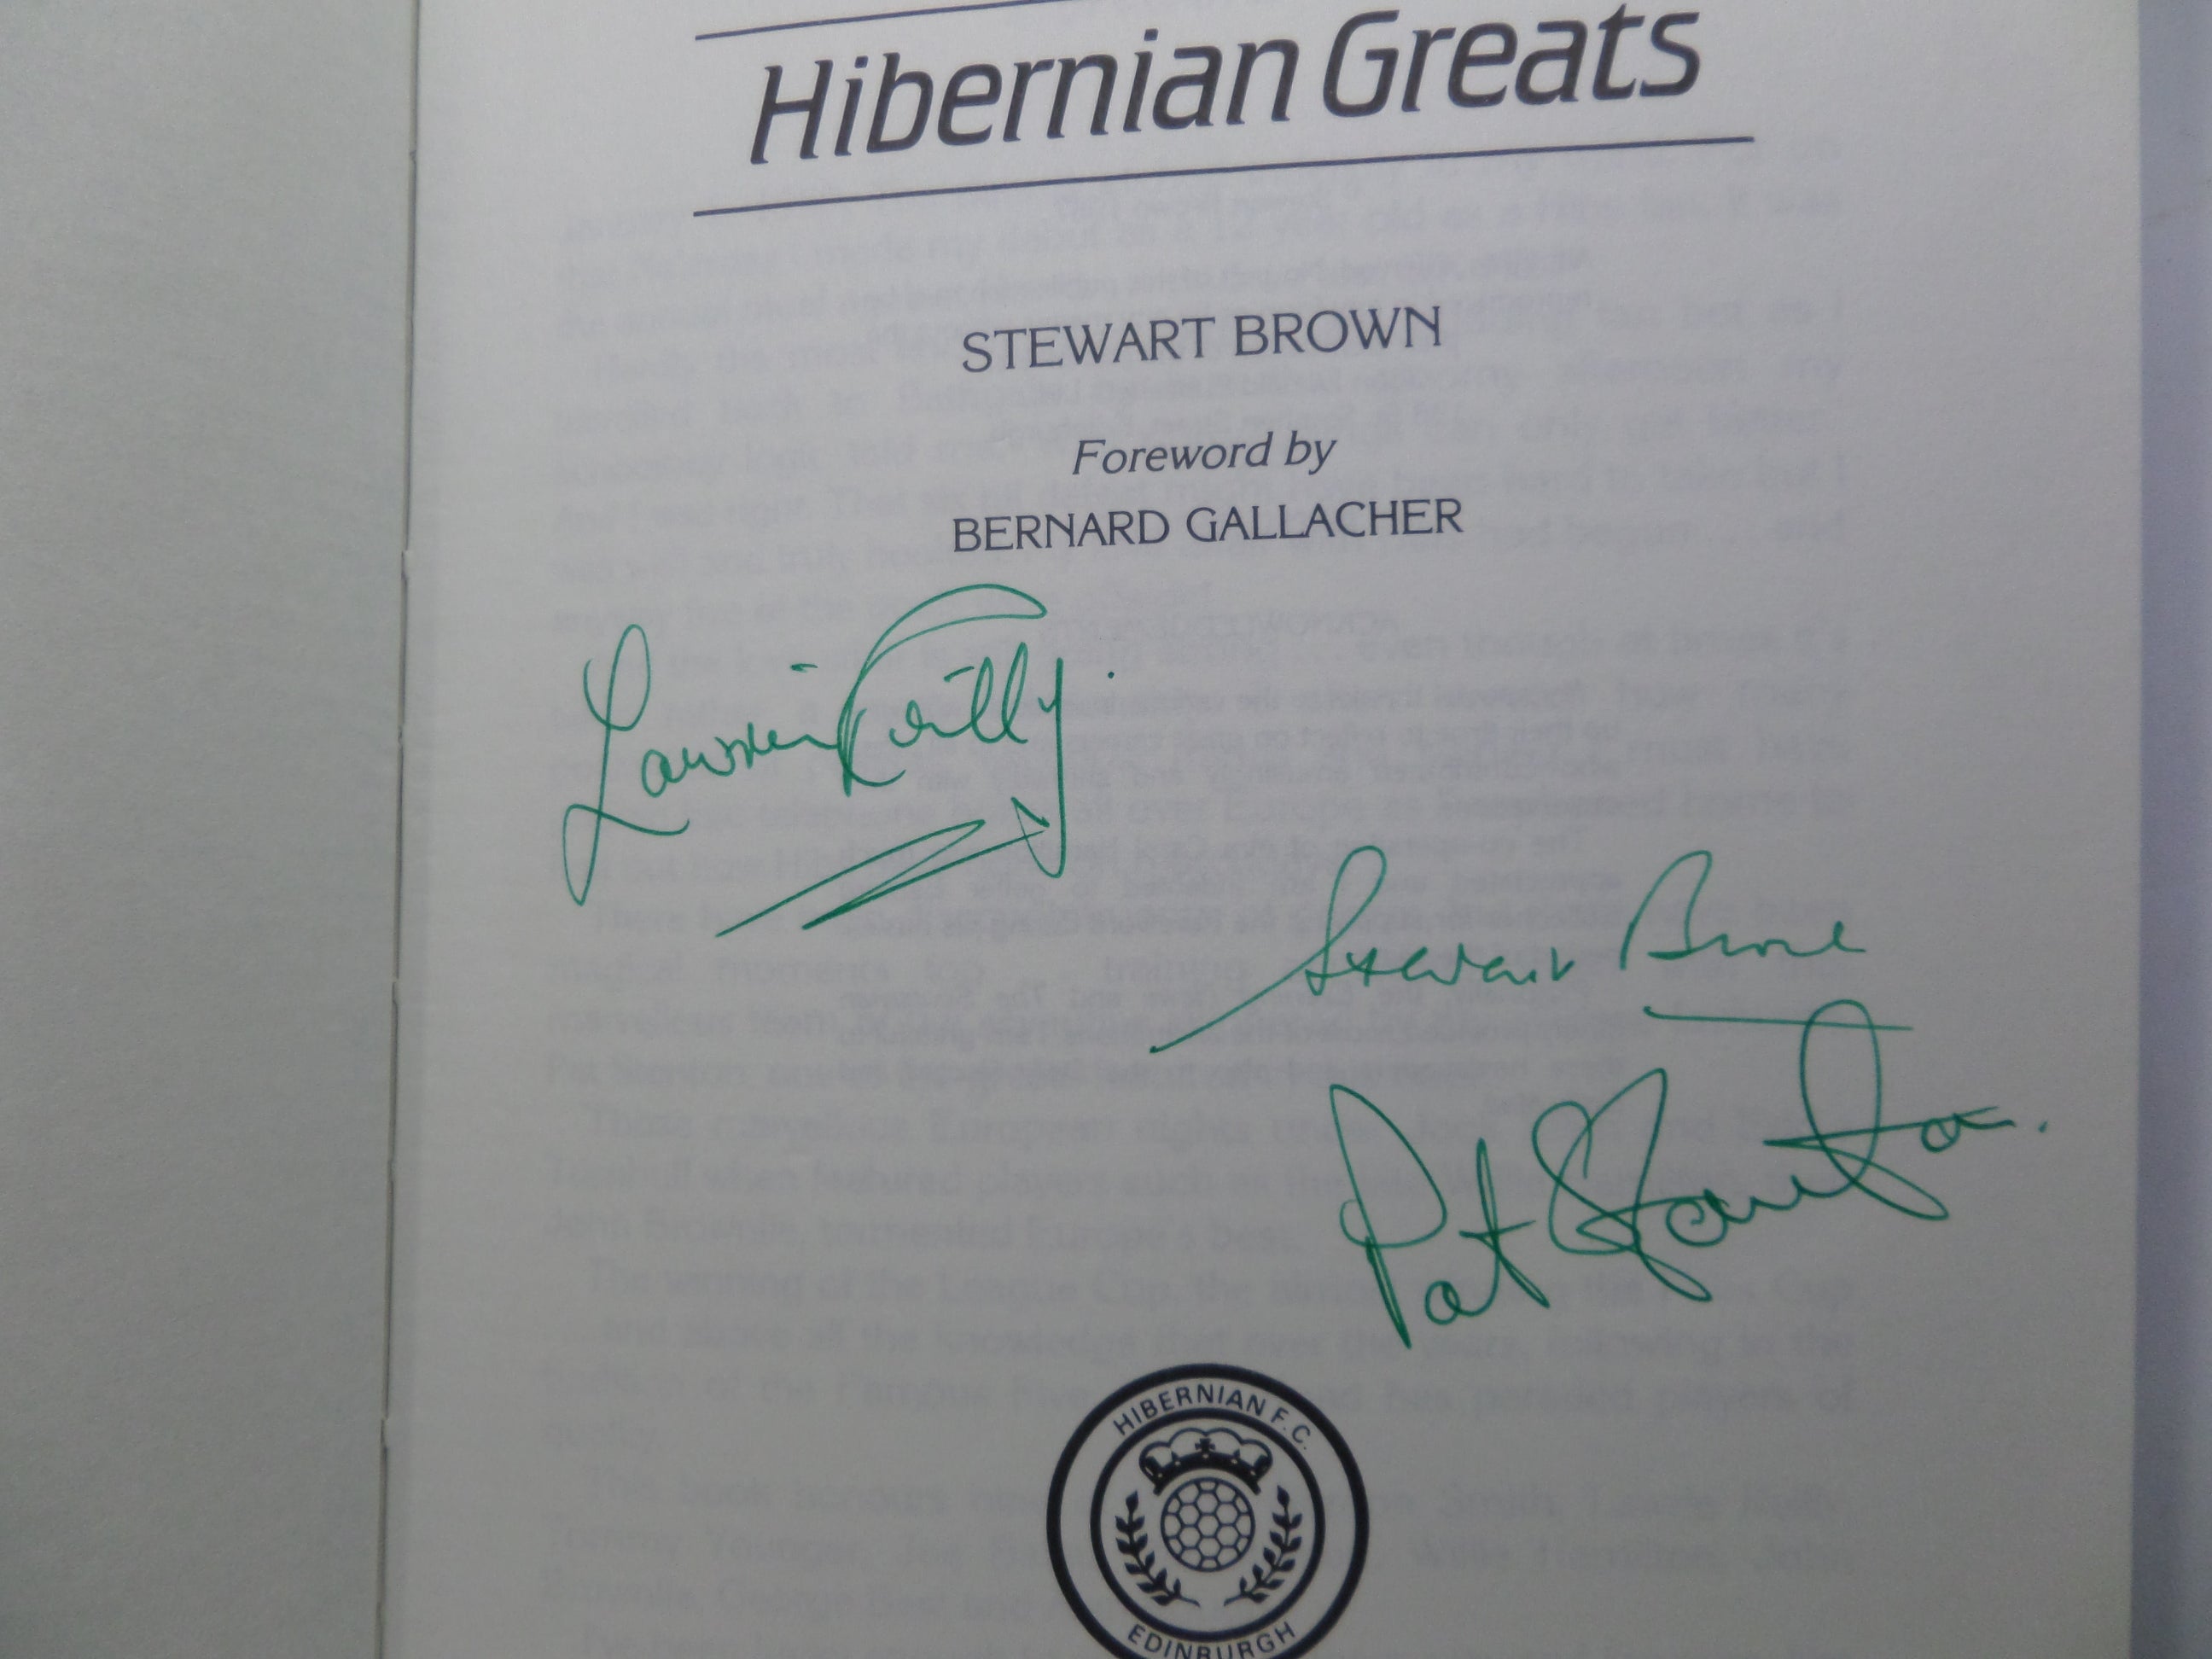 HIBERNIAN GREATS BY STEWART BROWN 1987 SIGNED FIRST EDITION HARDCOVER [SIGNED BY LAWRIE REILLY, PAT STANTON AND THE AUTHOR]